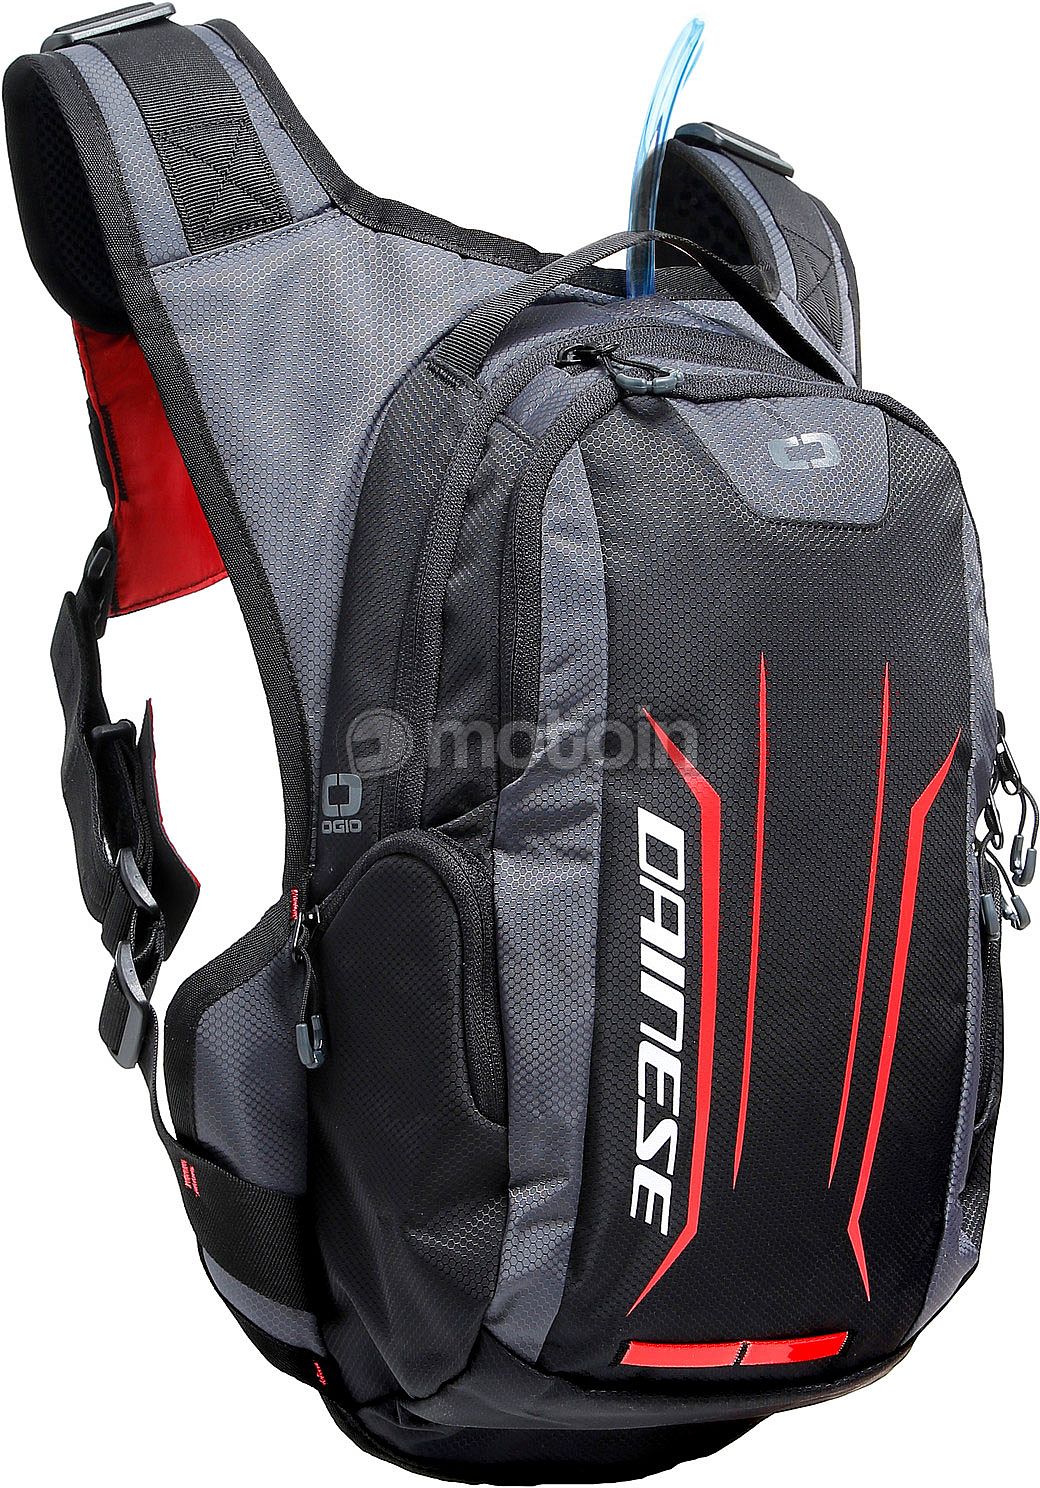 Dainese D-Throttle Backpack Review at RevZilla.com - YouTube